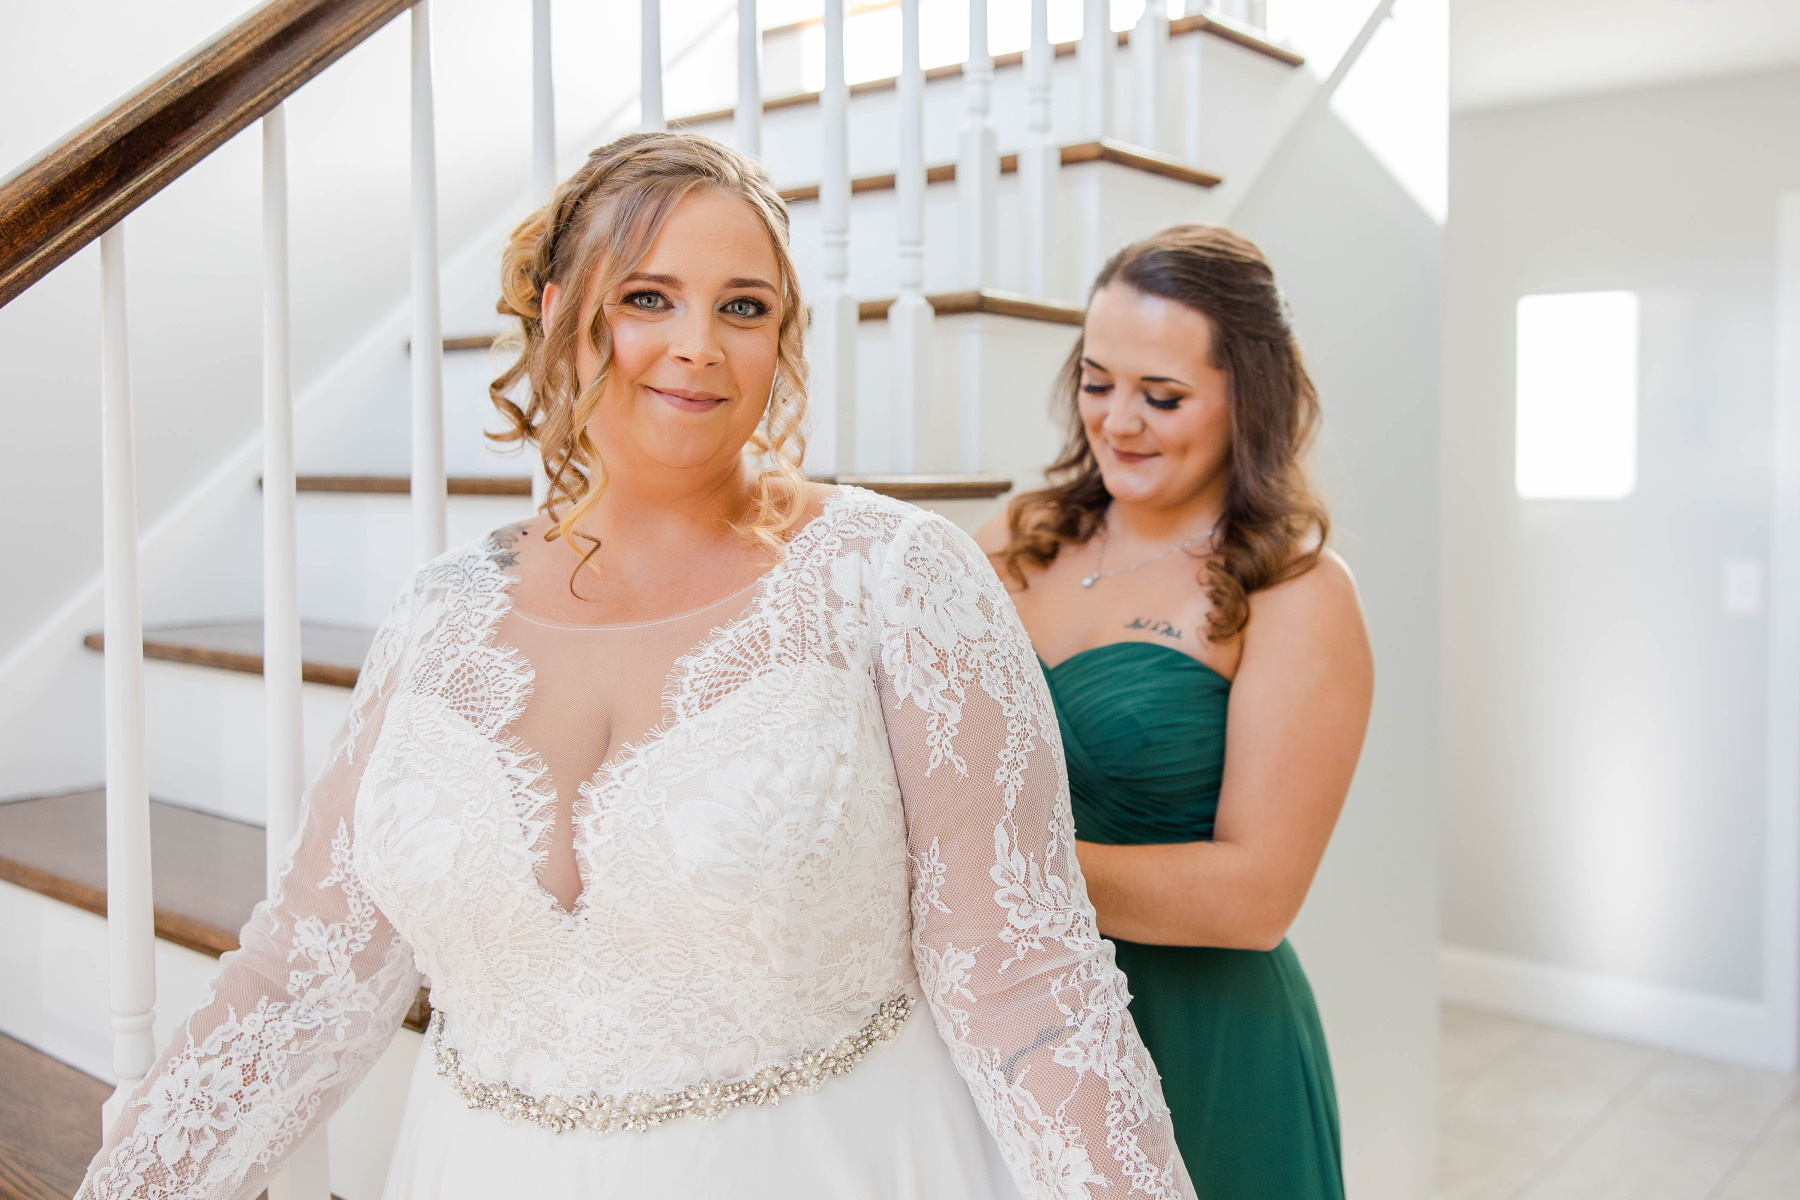 Bride smiles at camera while her maid of honor helps button her dress at Great Neck Country Club Wedding